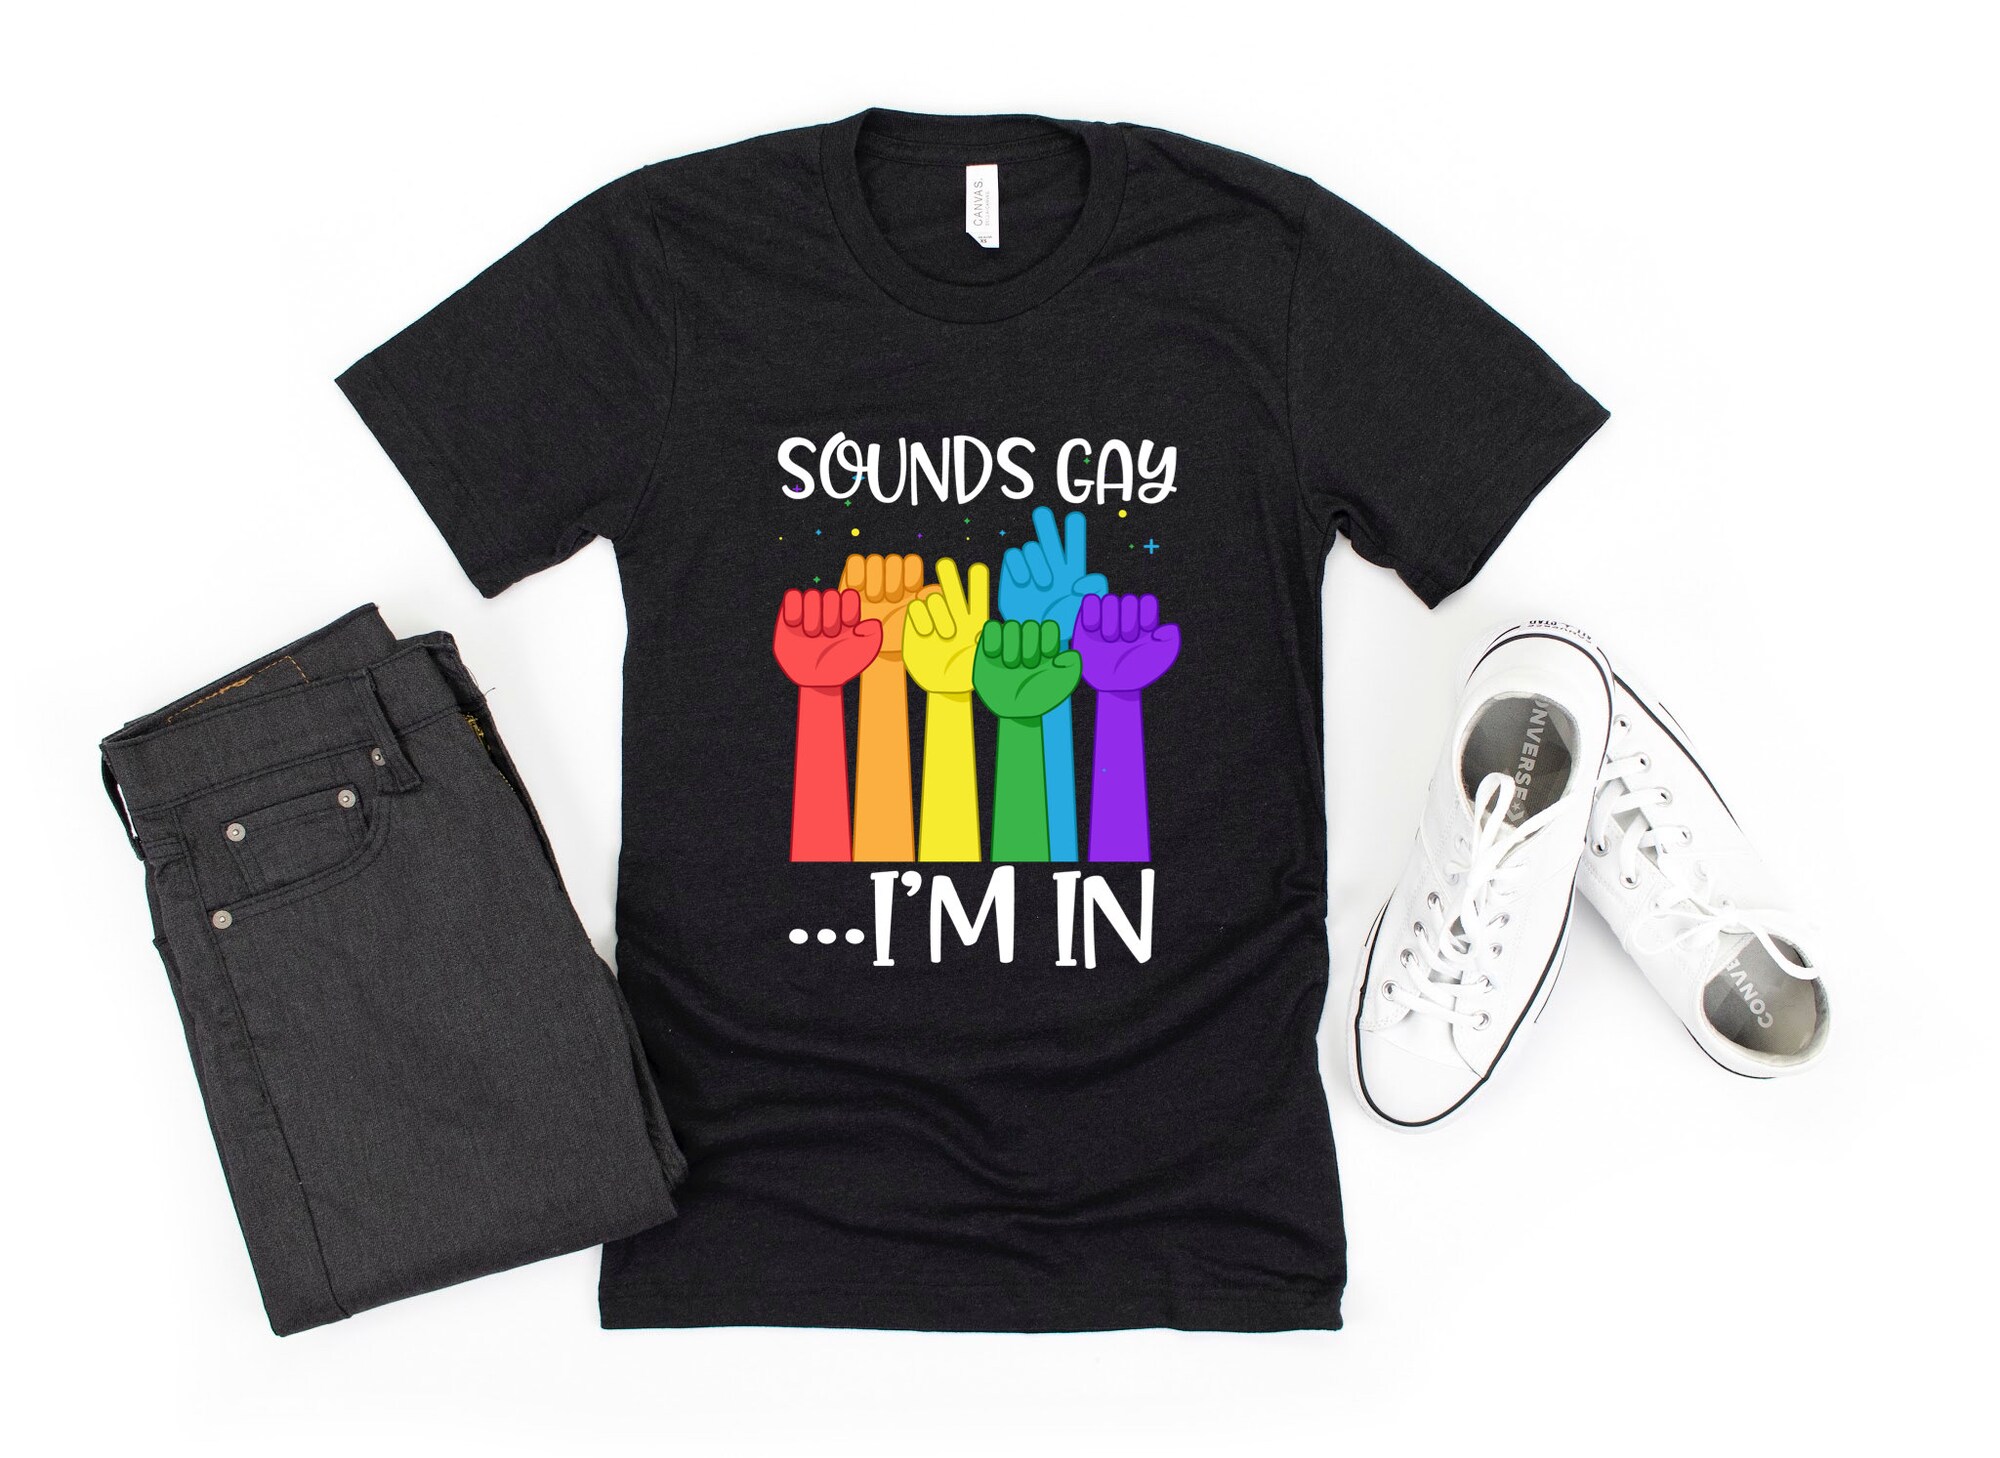 Discover Gay Pride Shirt/ Funny Gay Pride Gift/ Sounds Gay I'm In/ Fun Rainbow Pride Shirt